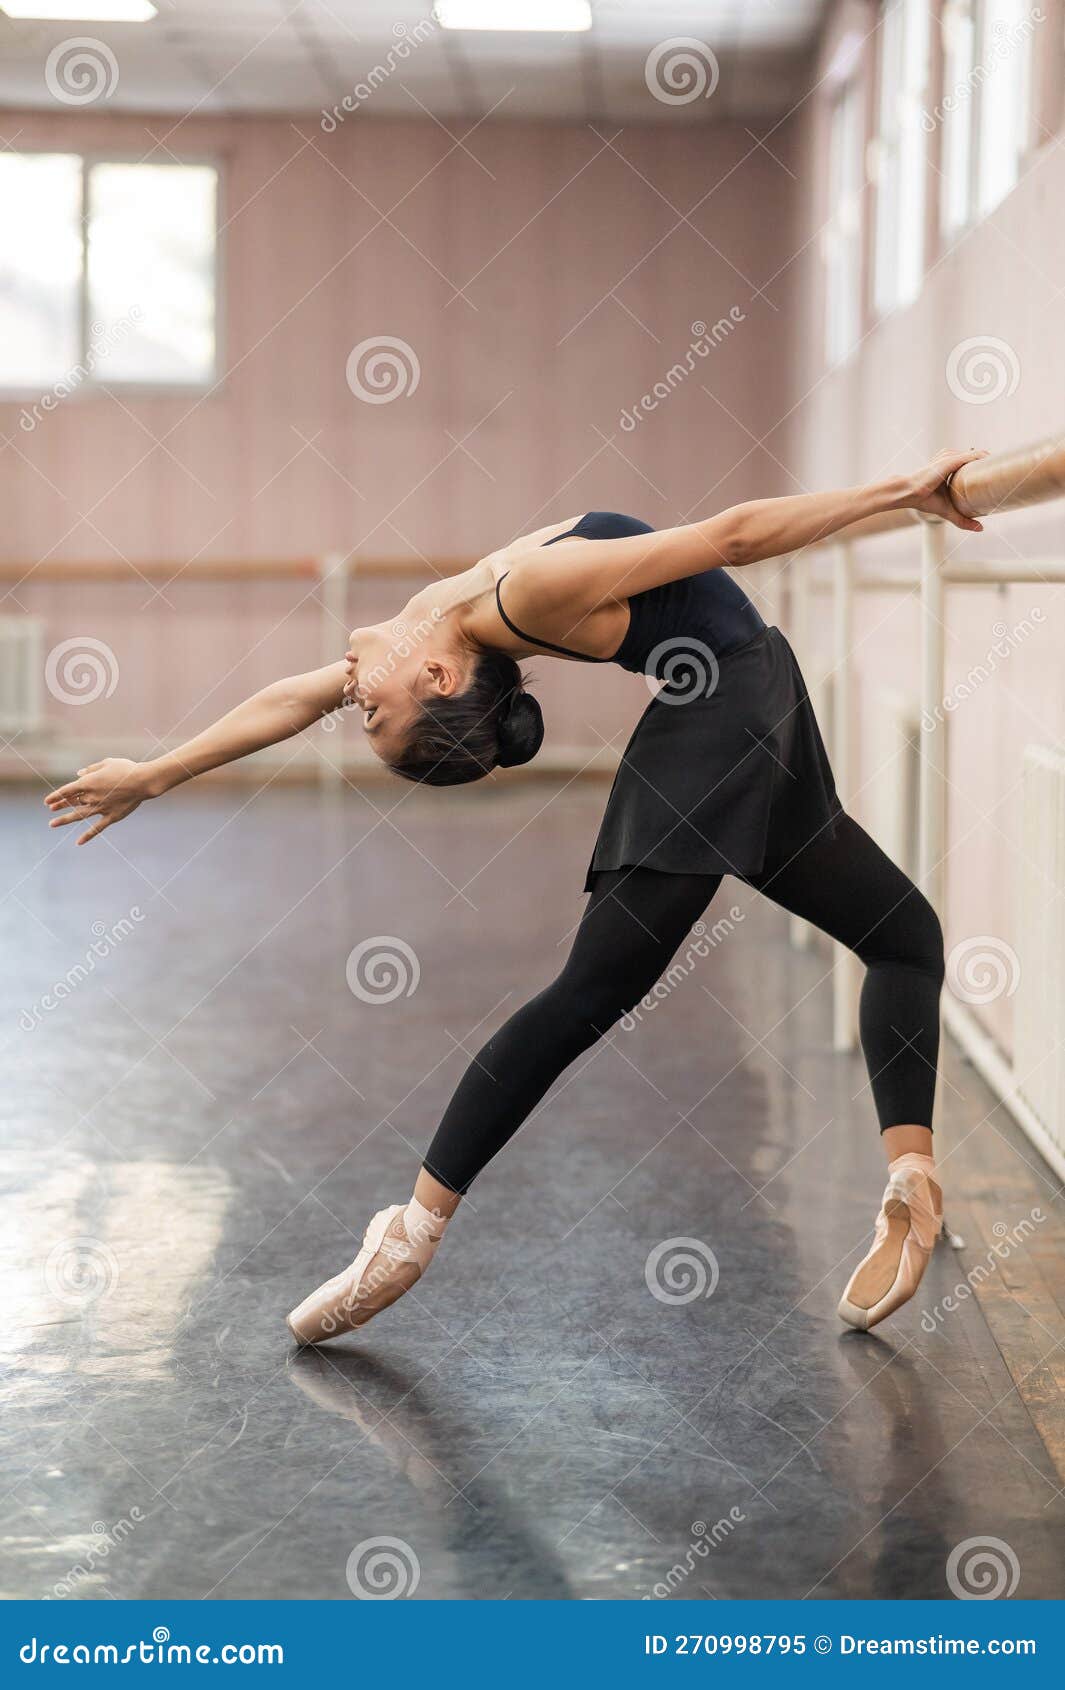 Asian Woman Doing Back Flexibility Exercises at the Ballet Barre